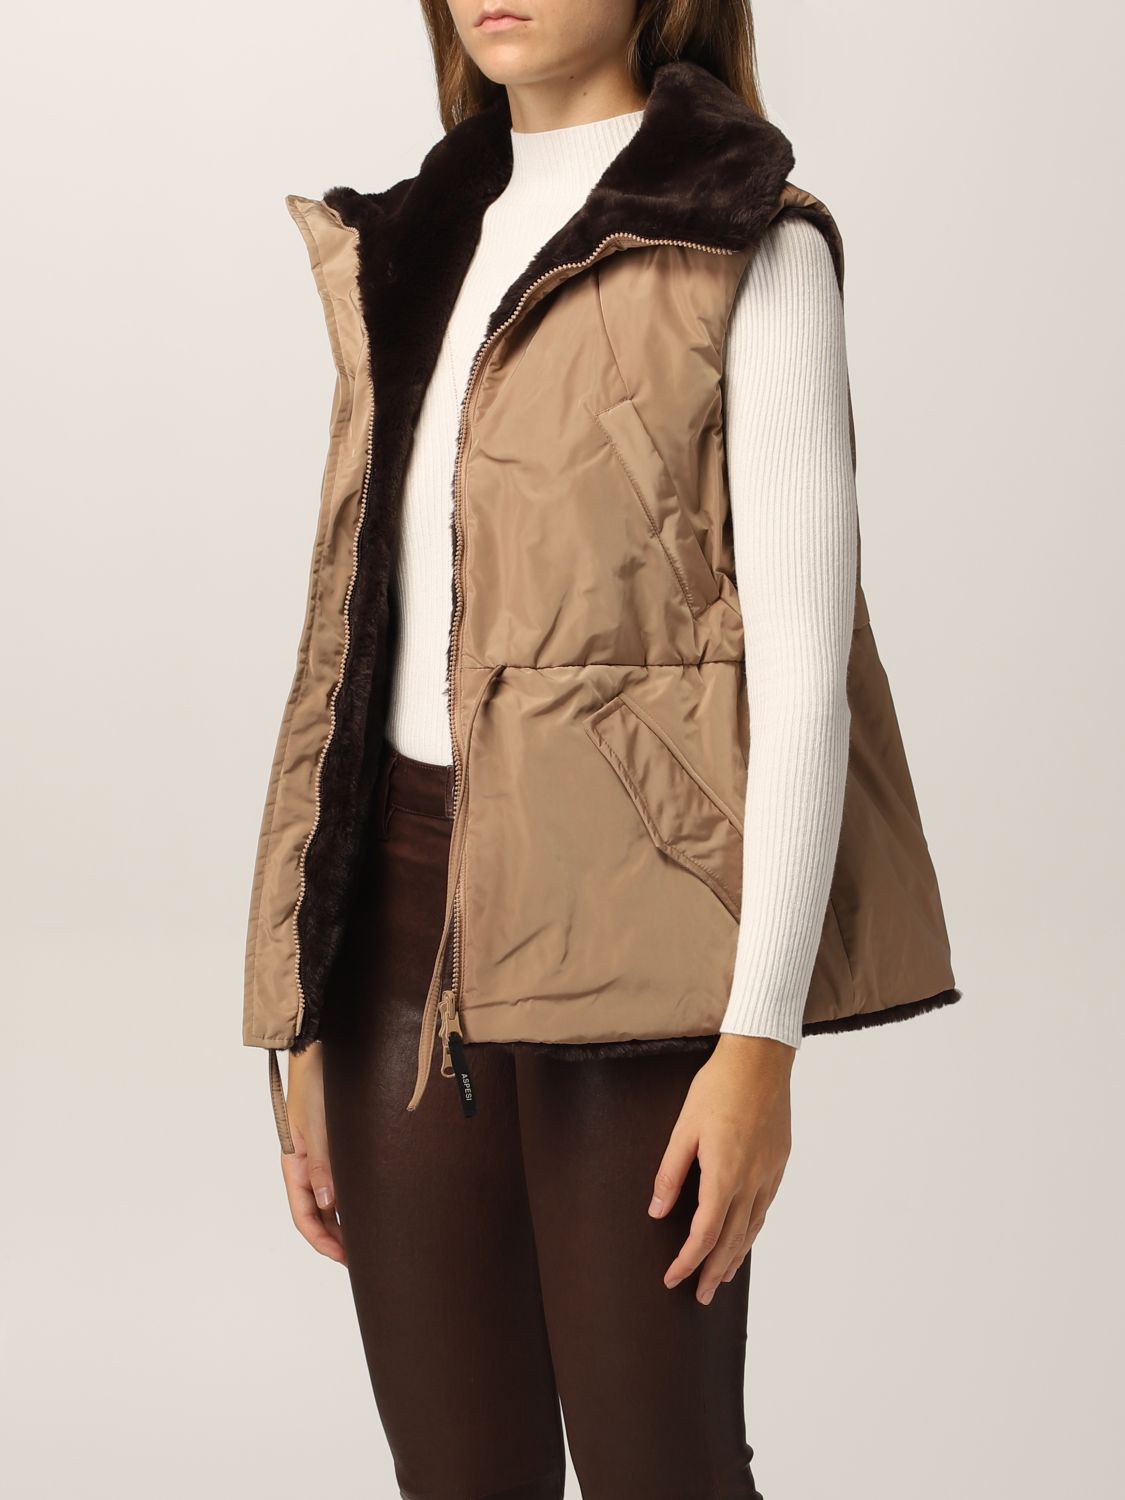 Women's gilet with fur lining